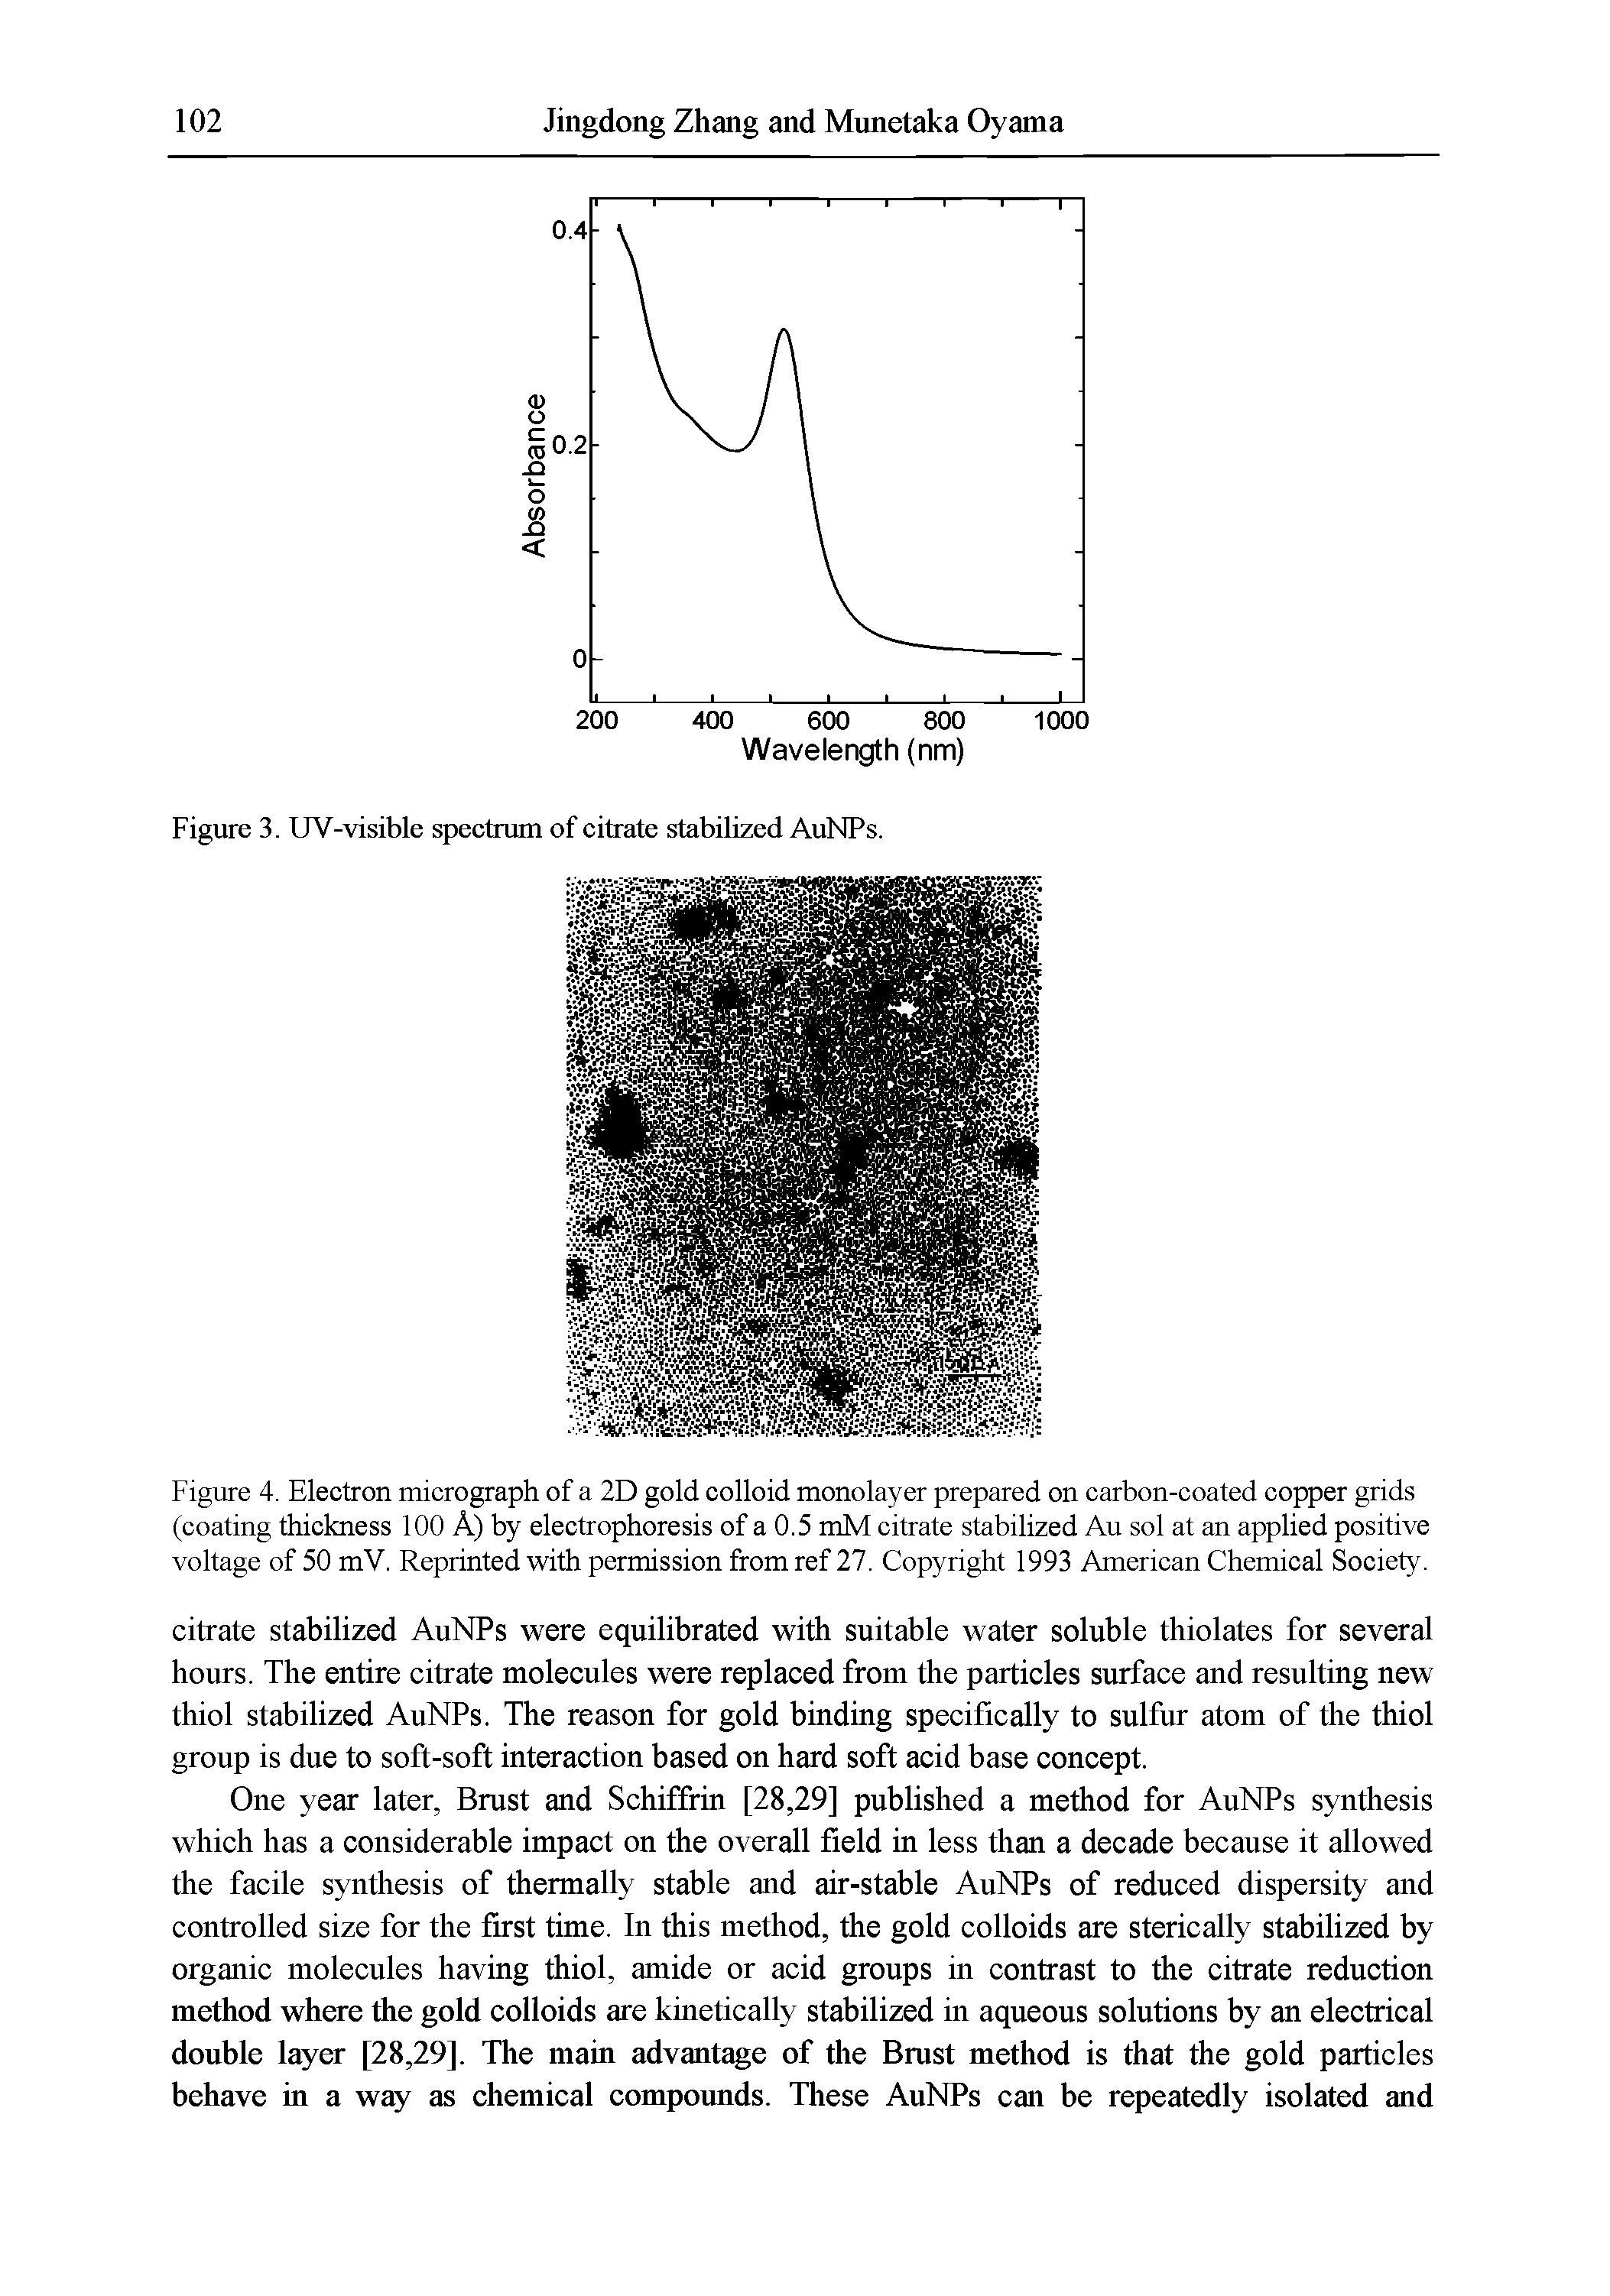 Figure 4. Electron micrograph of a 2D gold colloid monolayer prepared on carbon-coated copper grids (coating thickness 100 A) by electrophoresis of a 0.5 mM citrate stabilized Au sol at an applied positive voltage of 50 mV. Reprinted with permission from ref 27. Copyright 1993 American Chemical Society.